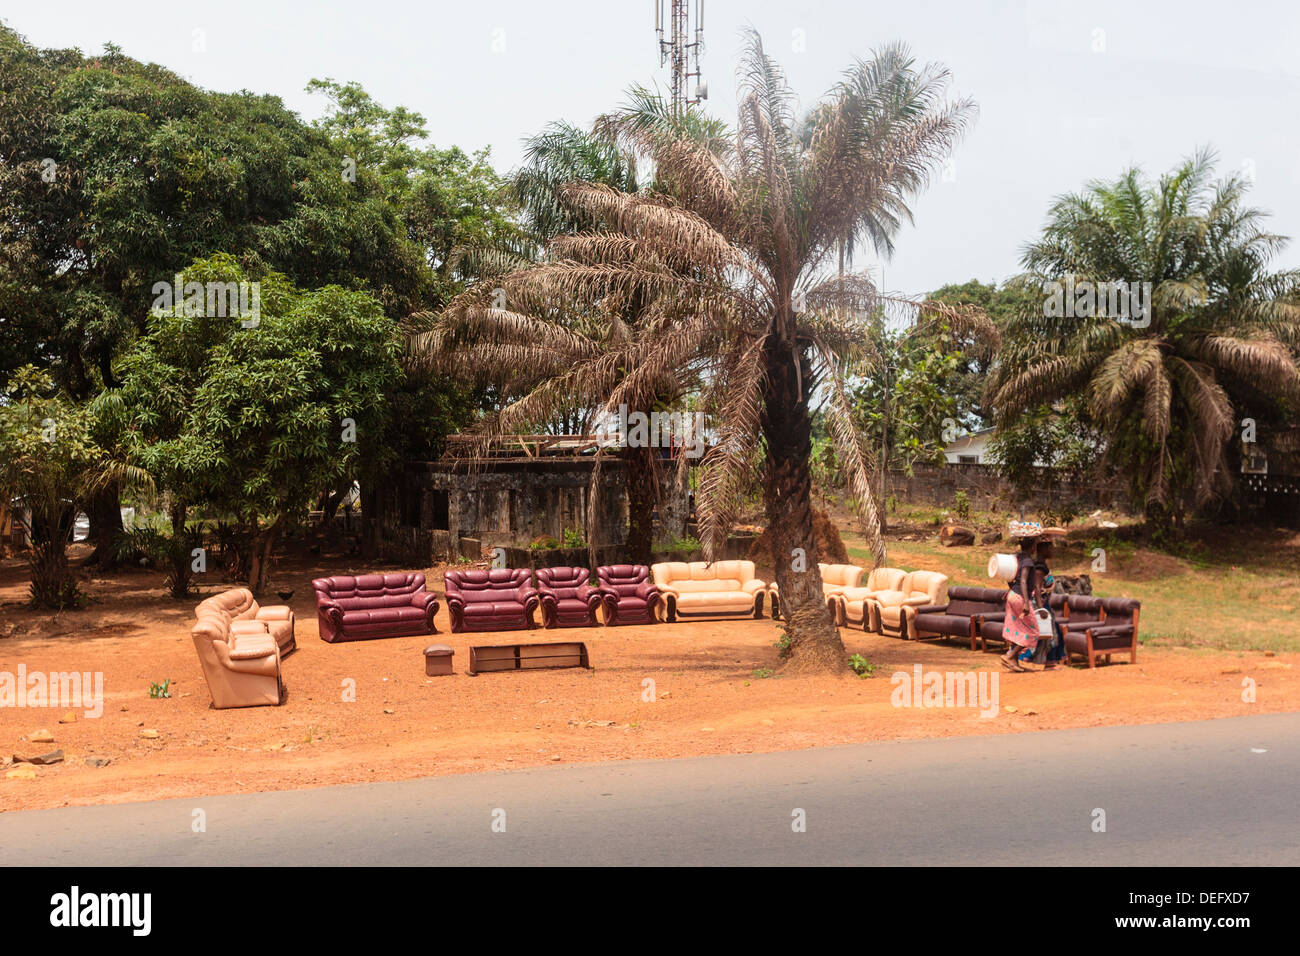 Africa, Liberia, Monrovia. Couches and chairs for sale along roadside. Stock Photo